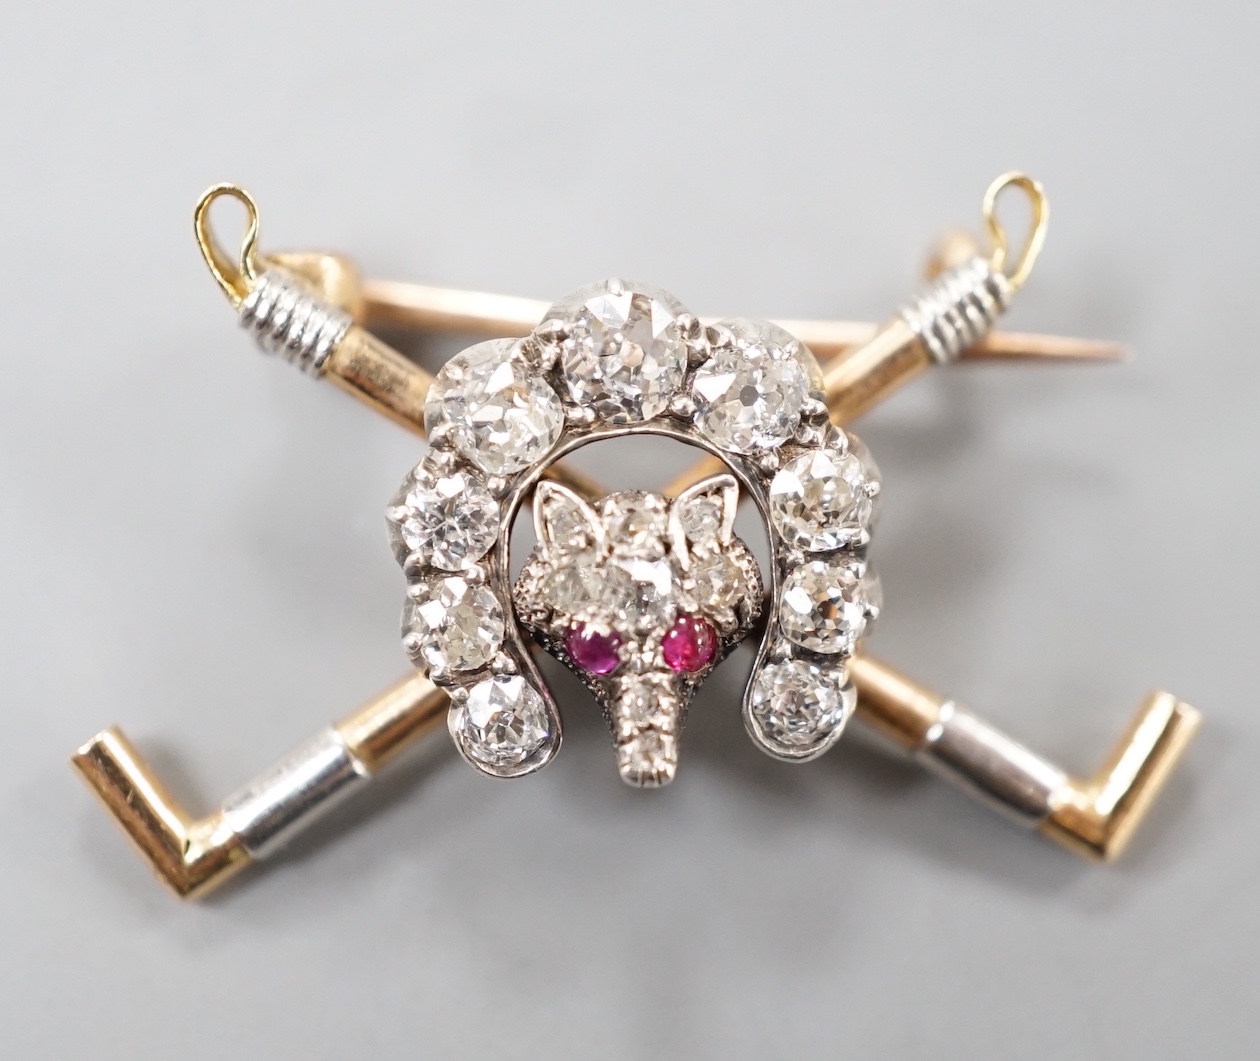 An Edwardian yellow metal, ruby and diamond set hunting brooch, modelled as a horseshoe and fox head upon crossed riding crops, 29mm, gross 4.2 grams.